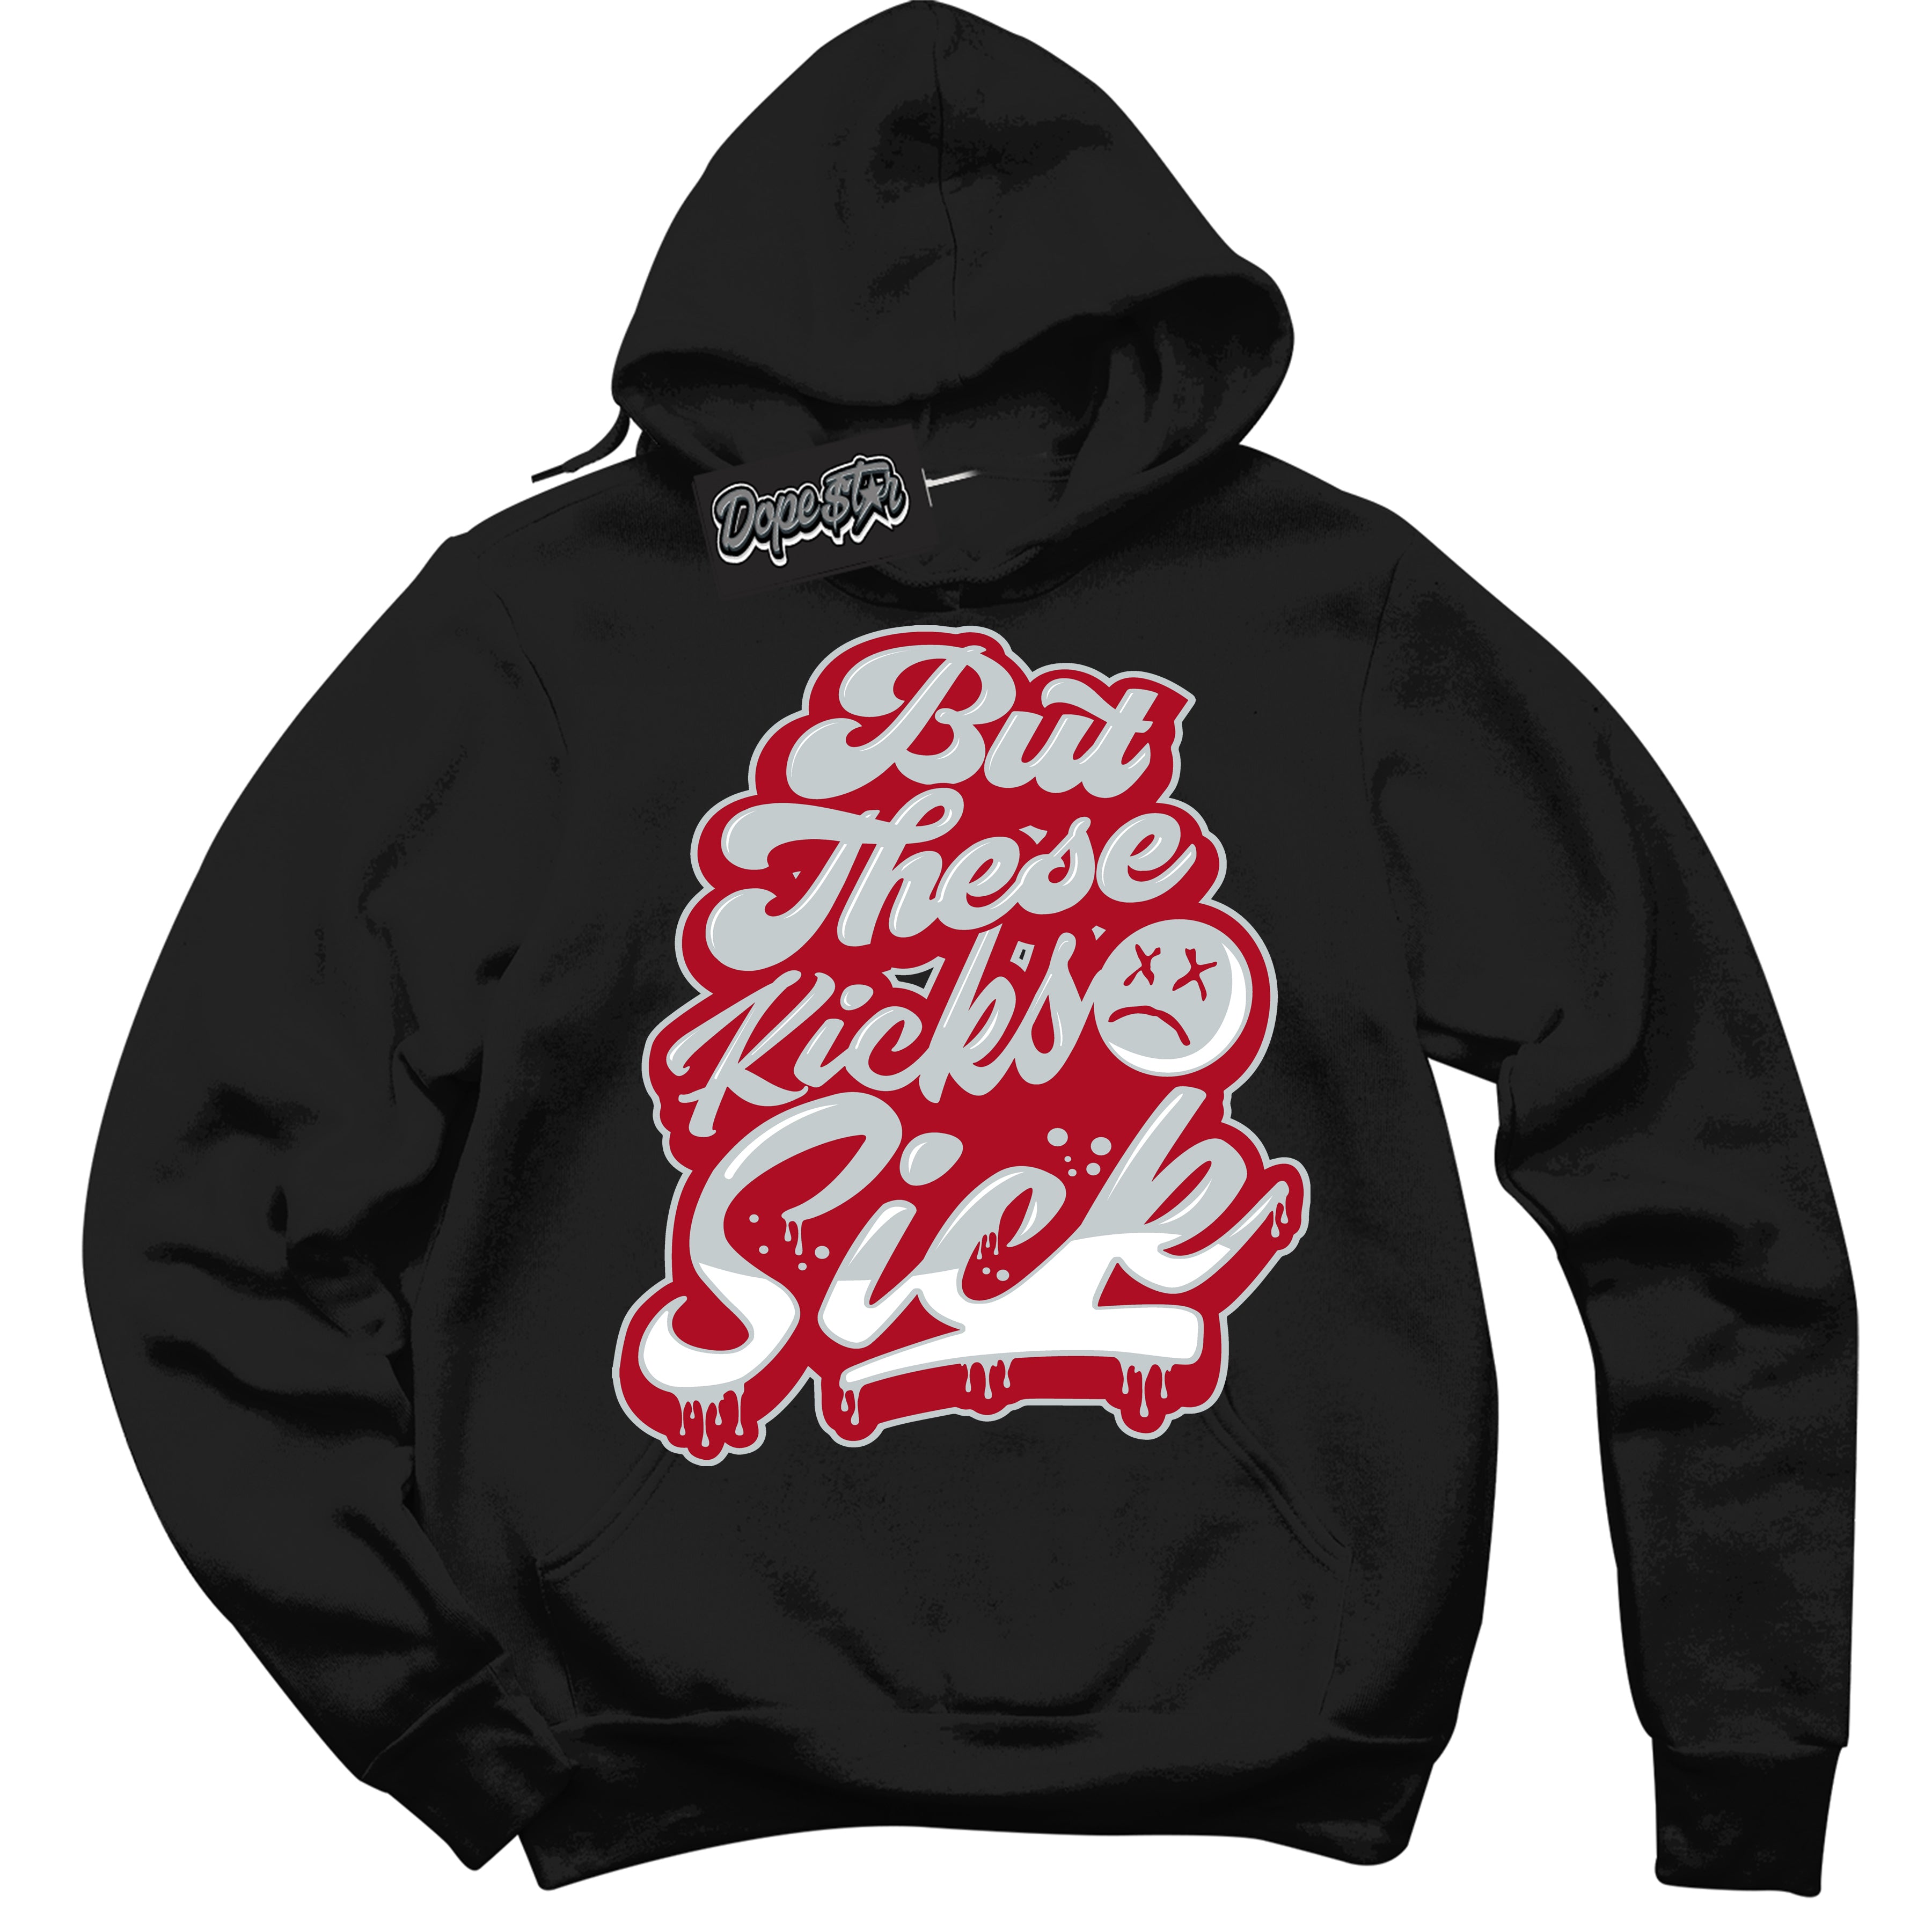 Cool Black Hoodie with “ Kick Sick ”  design that Perfectly Matches  Reverse Ultraman Sneakers.